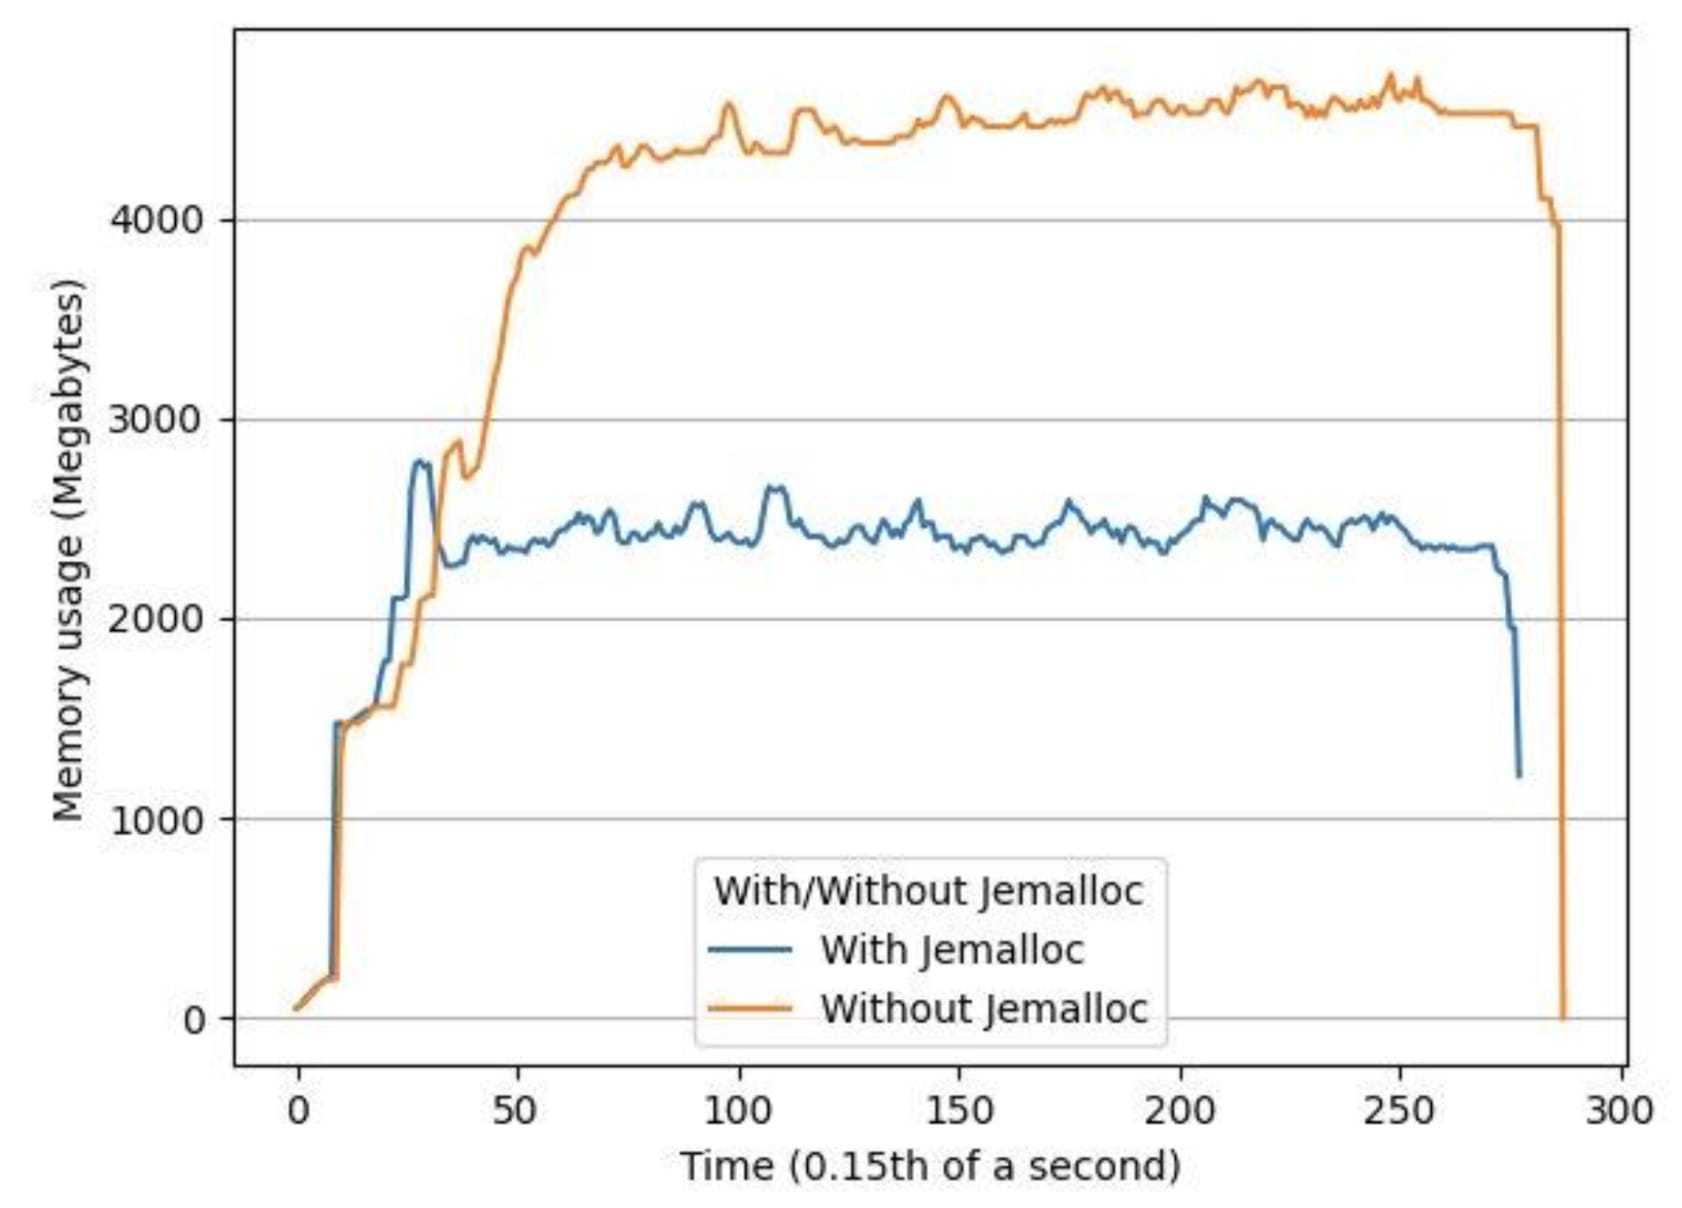 Figure 5: Memory usage over time using the same input file with and without jemalloc